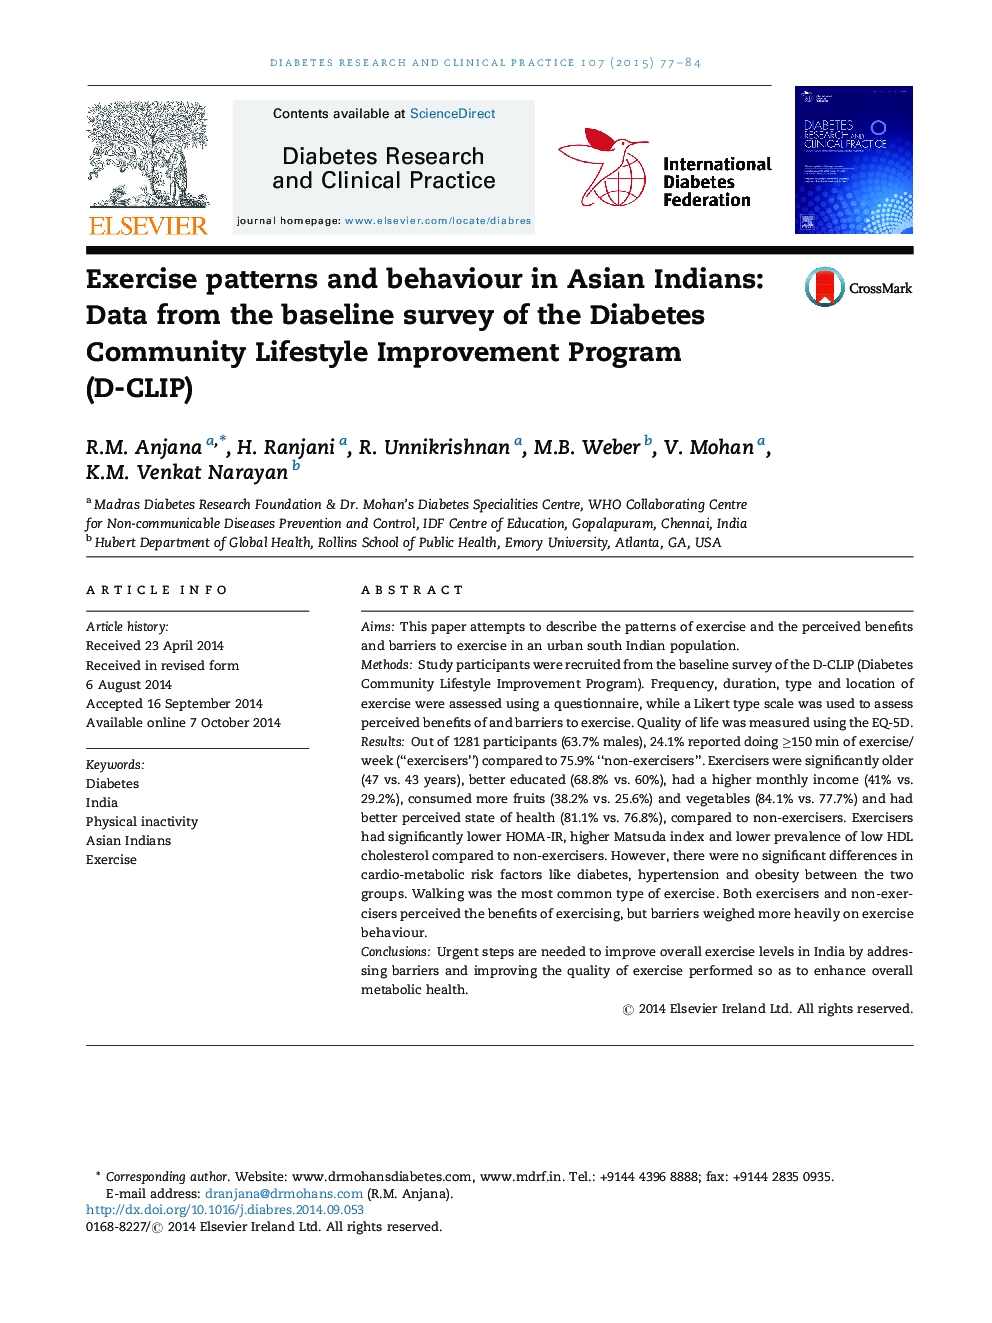 Exercise patterns and behaviour in Asian Indians: Data from the baseline survey of the Diabetes Community Lifestyle Improvement Program (D-CLIP)